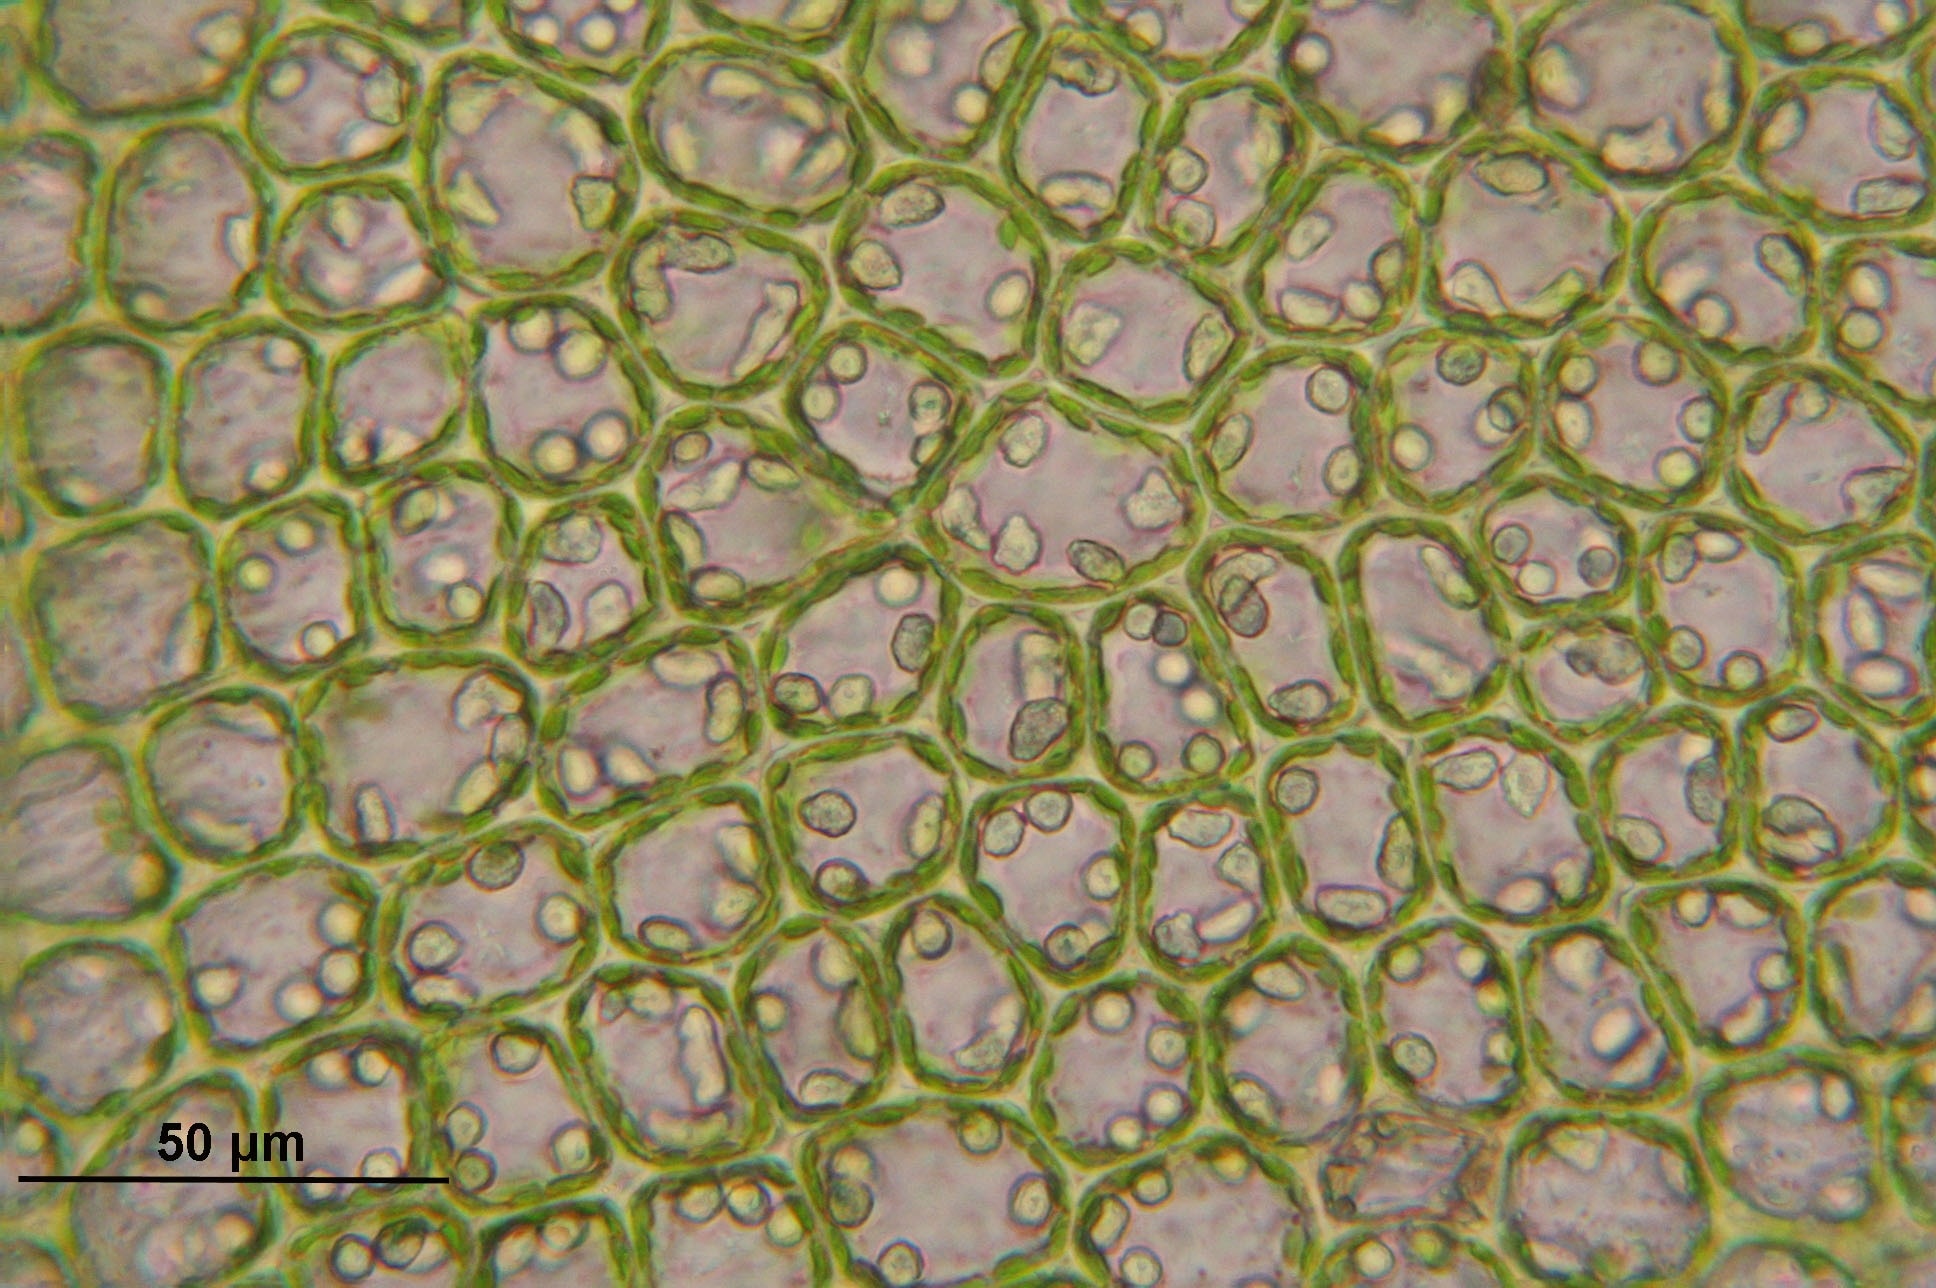 brown and green microorganism